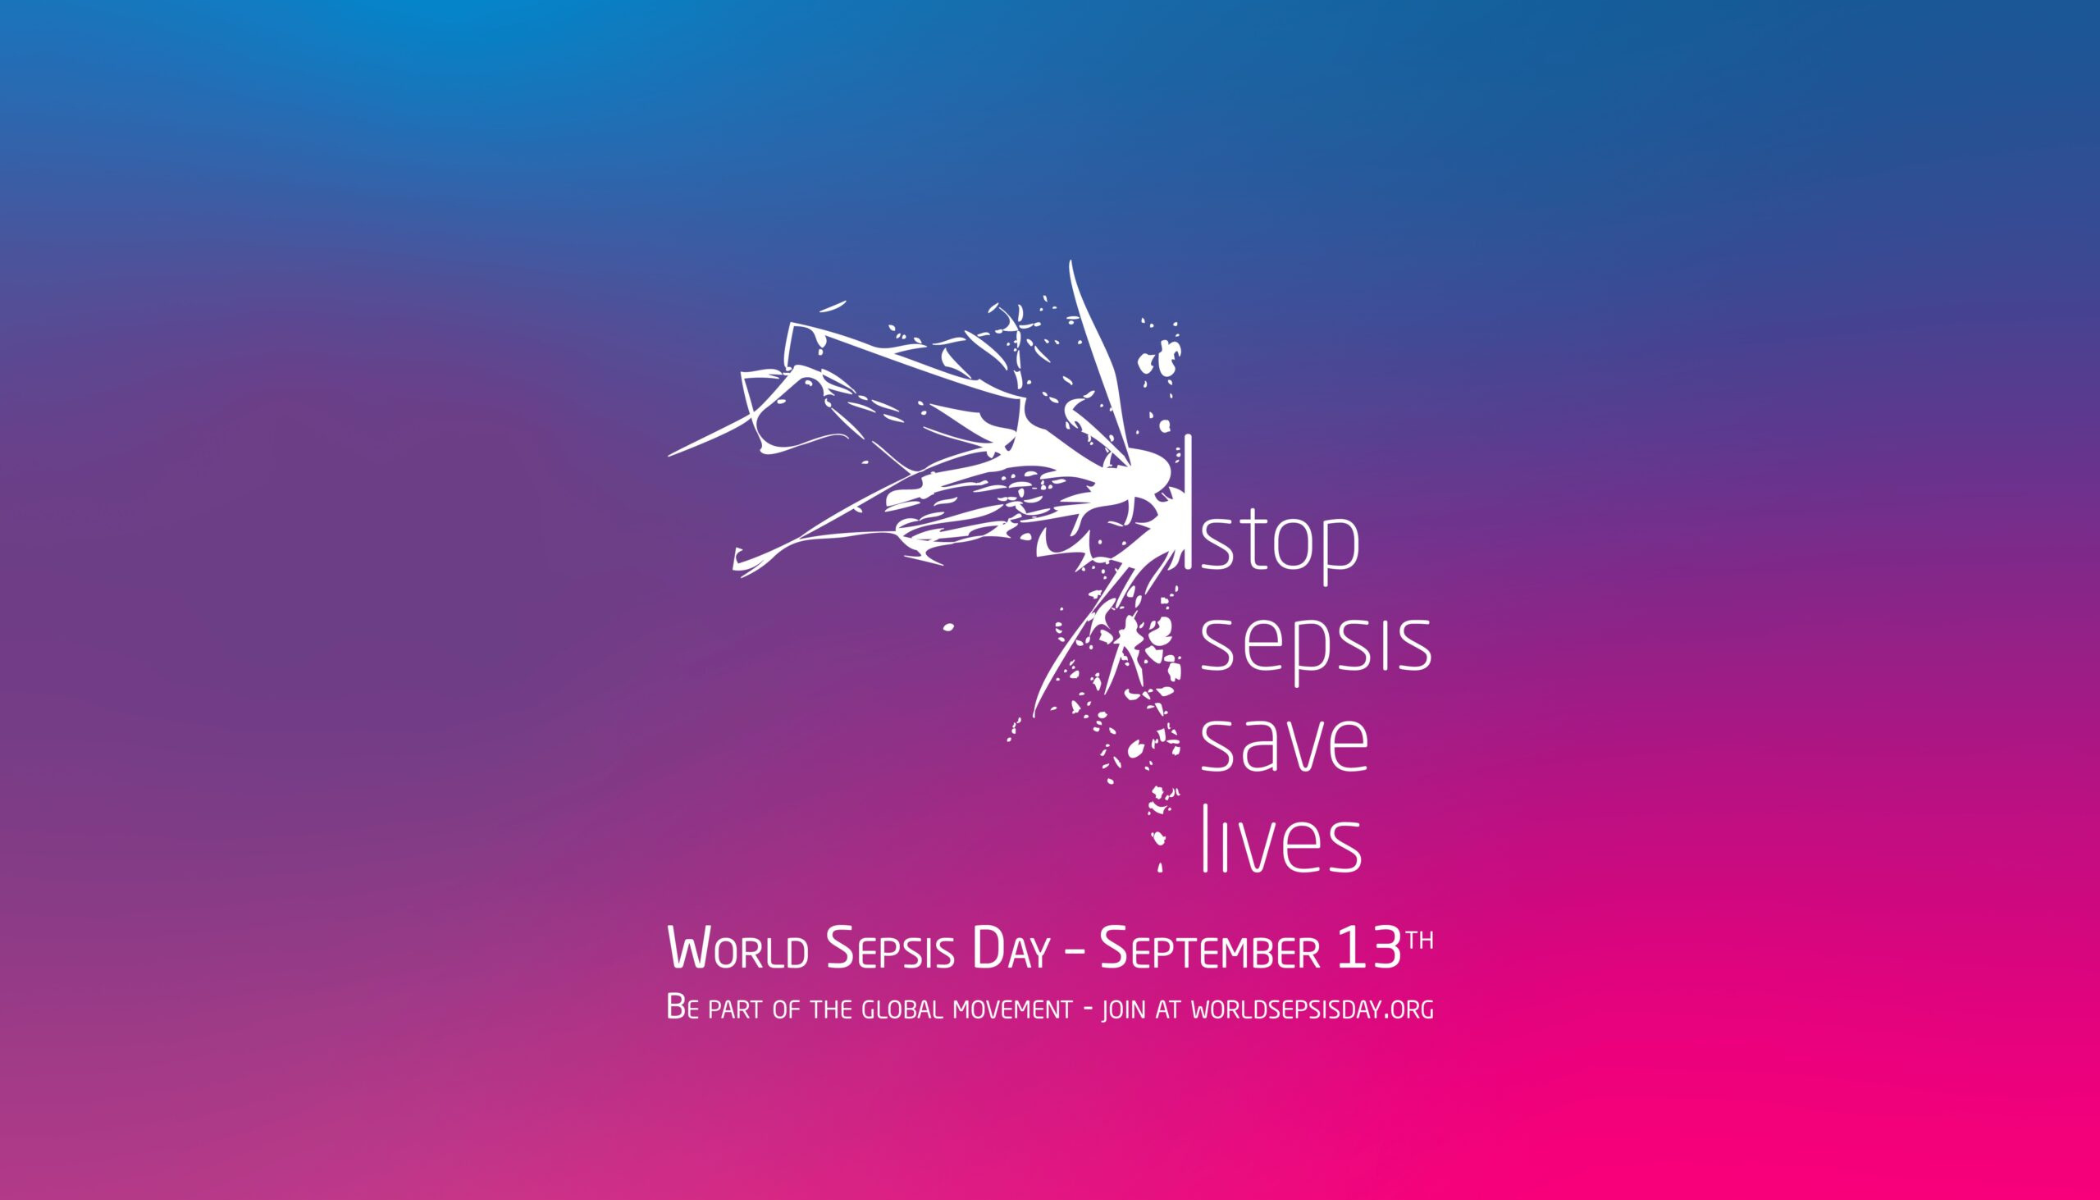 World Sepsis Day: WFSA Signs Berlin Declaration on Sepsis